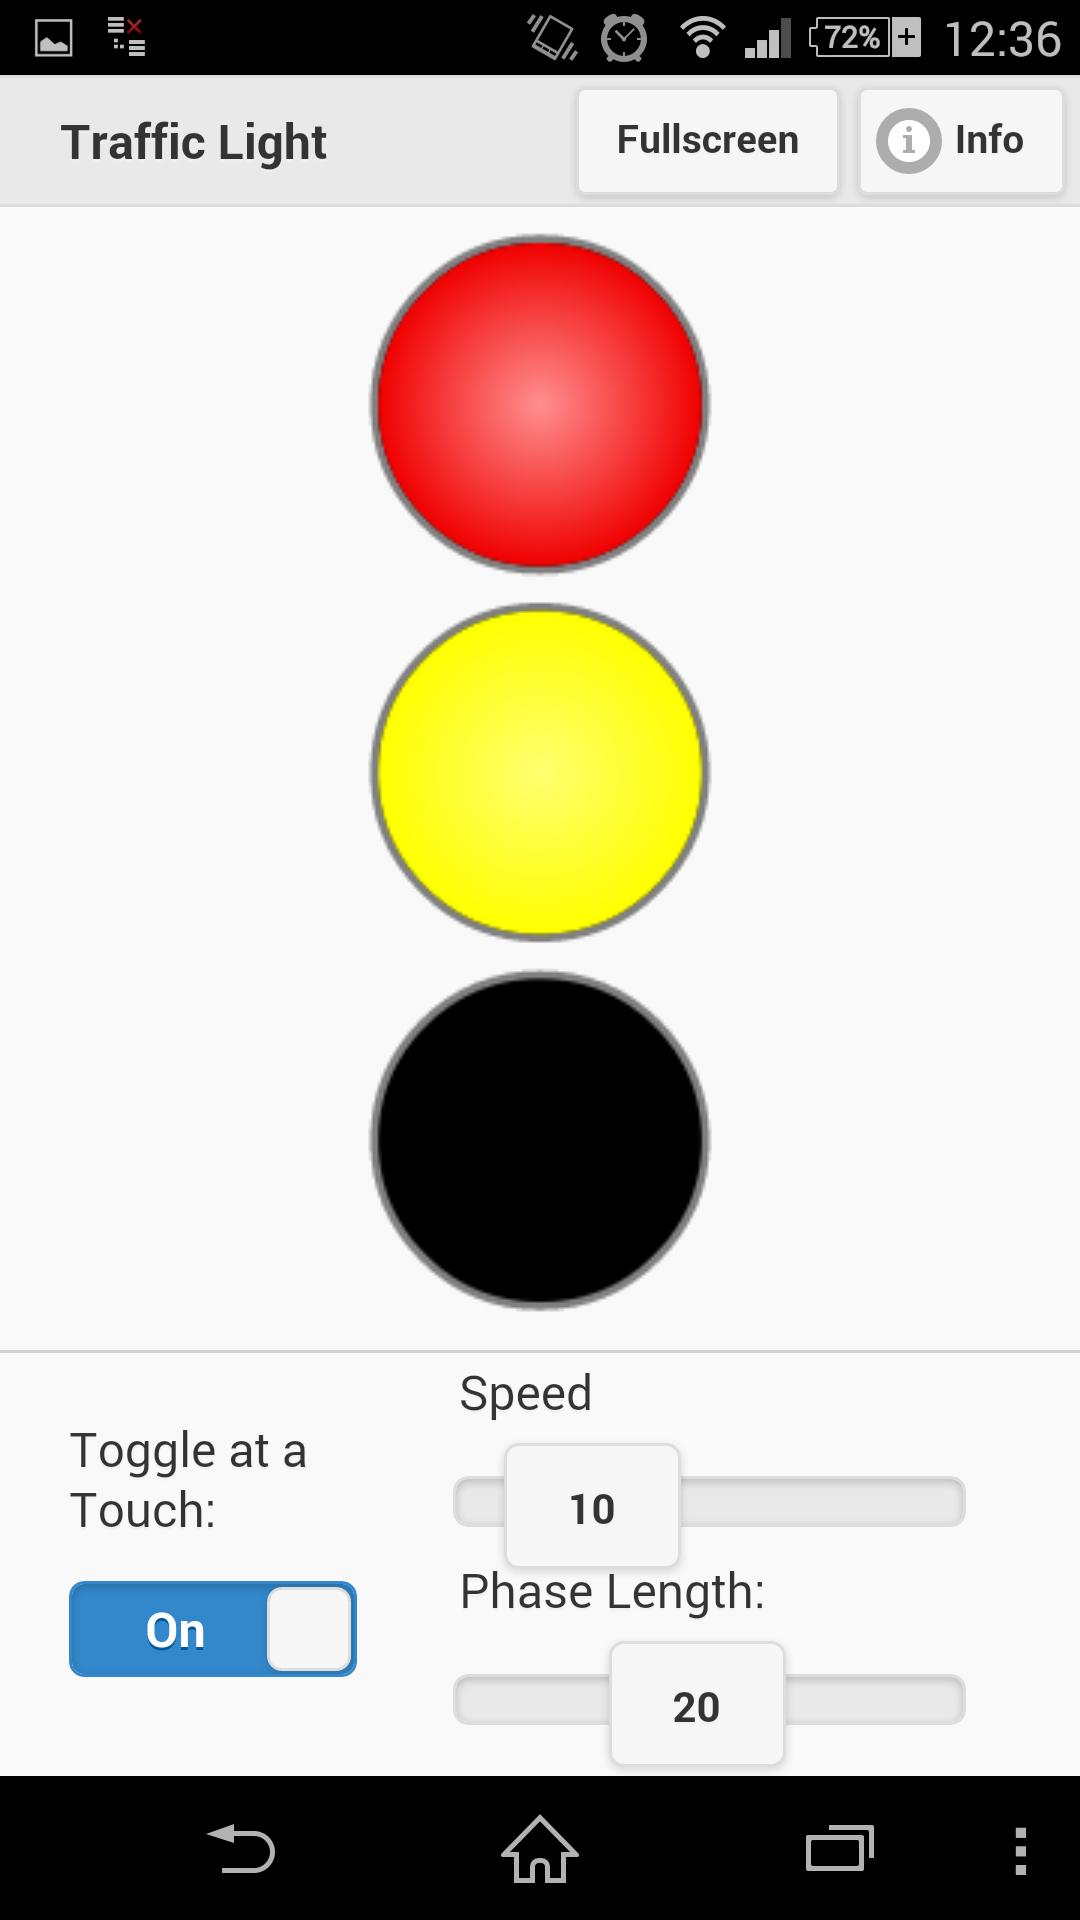 Traffic Light Simulator for Android - APK Download